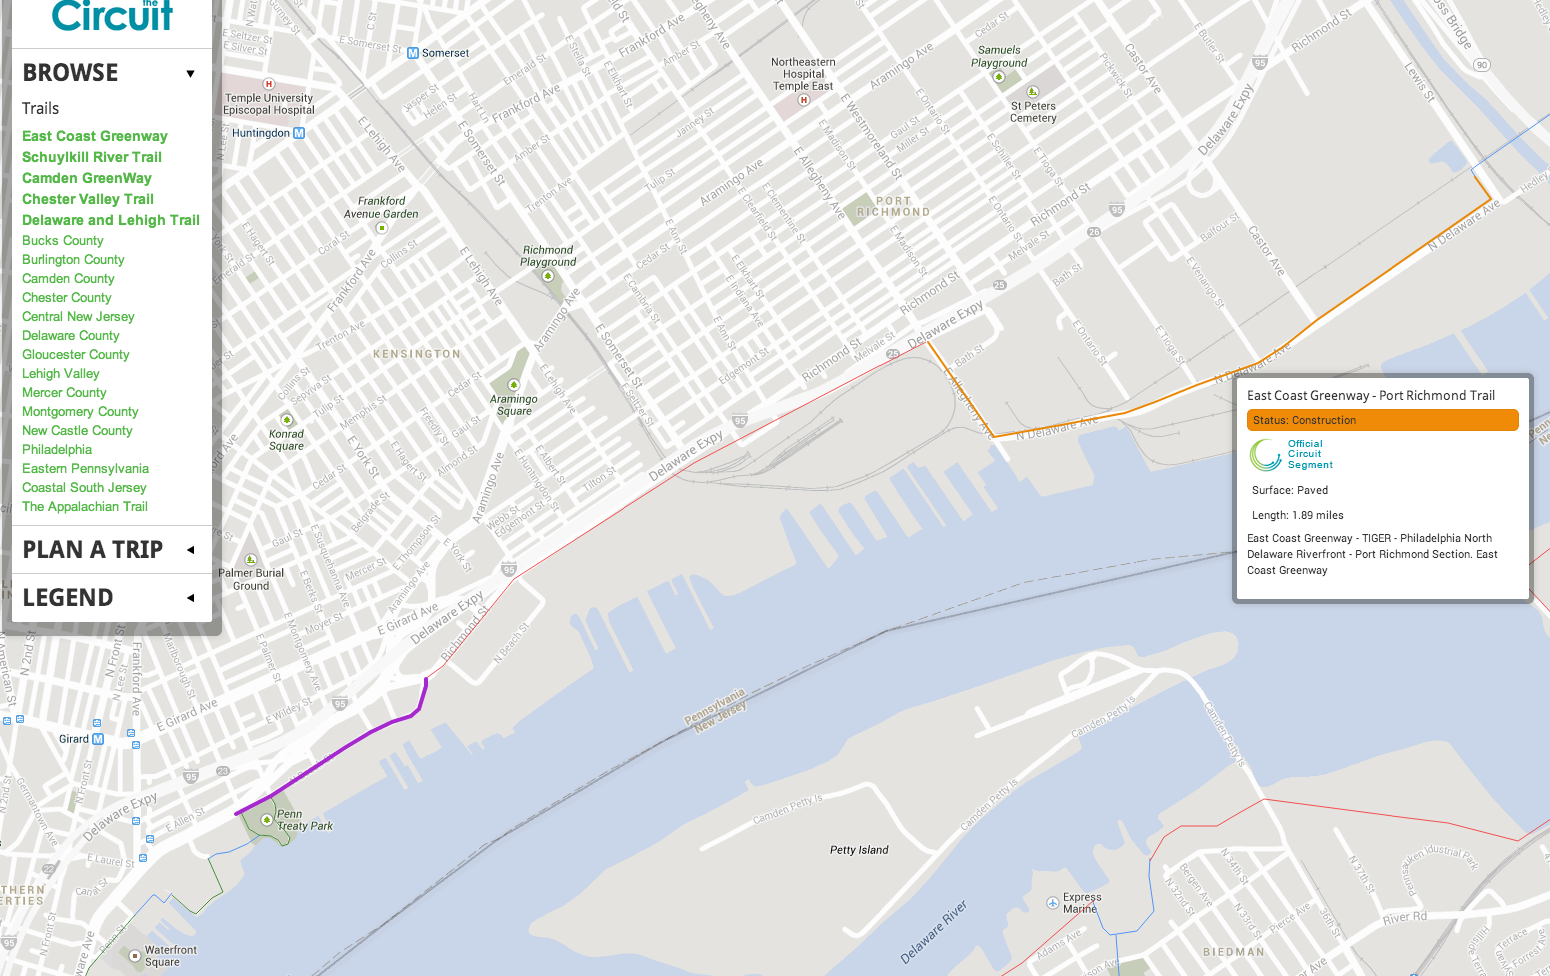 The Frankford Creek Greenway would feed into the Port Richmond Trail, which in turn links to additional Delaware River Trails